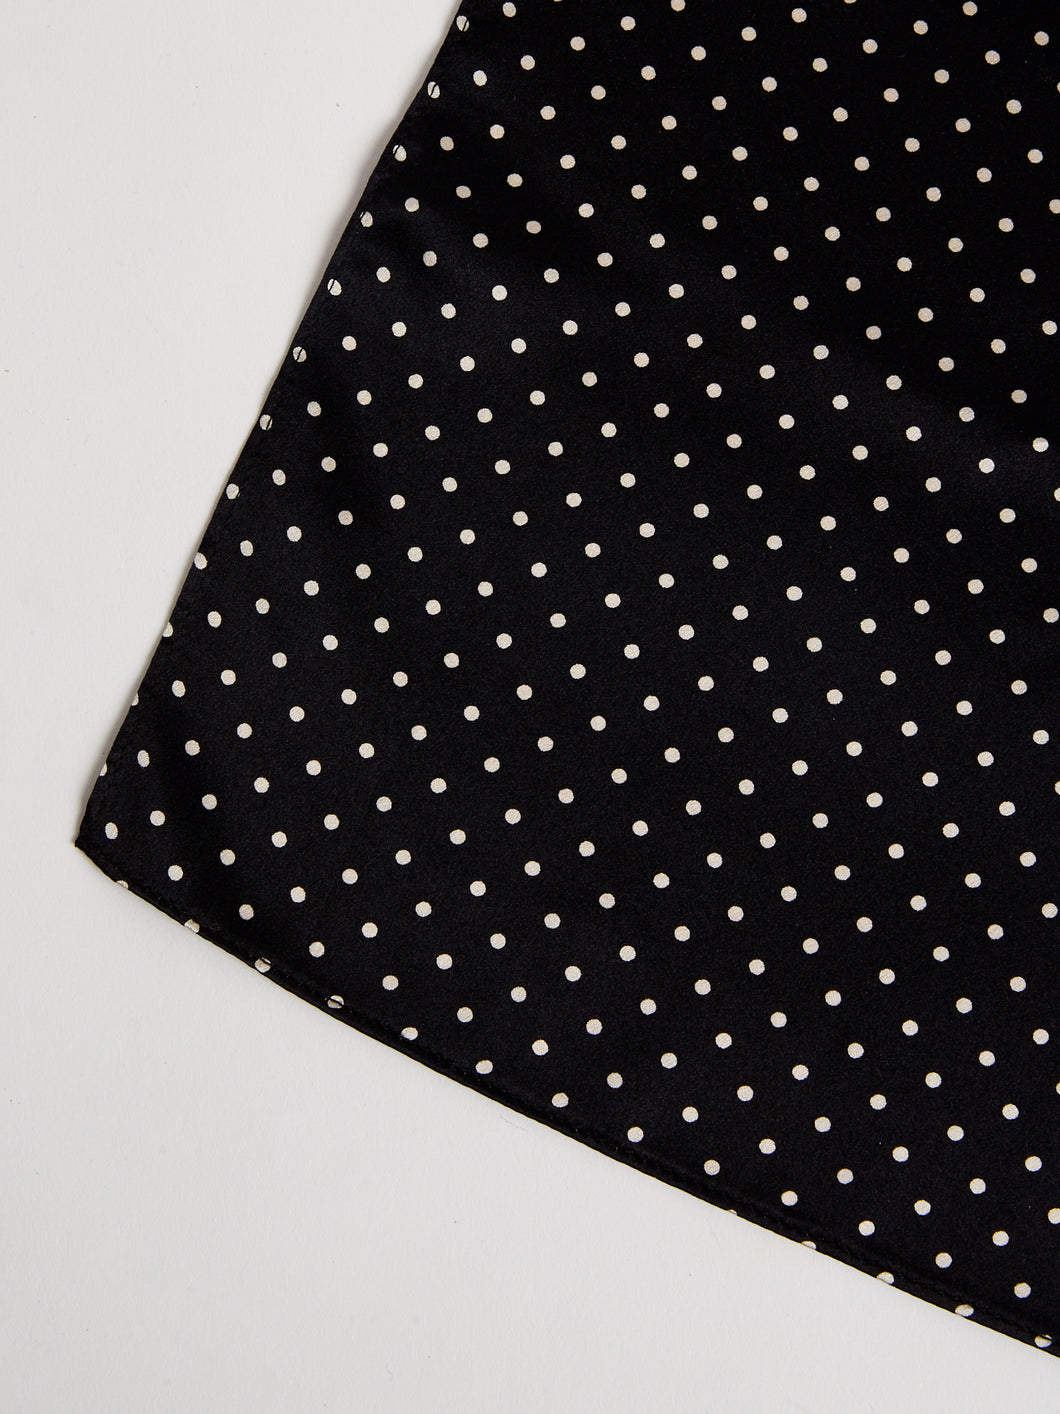 The Arc Petite Scarf in Black and White Microdot